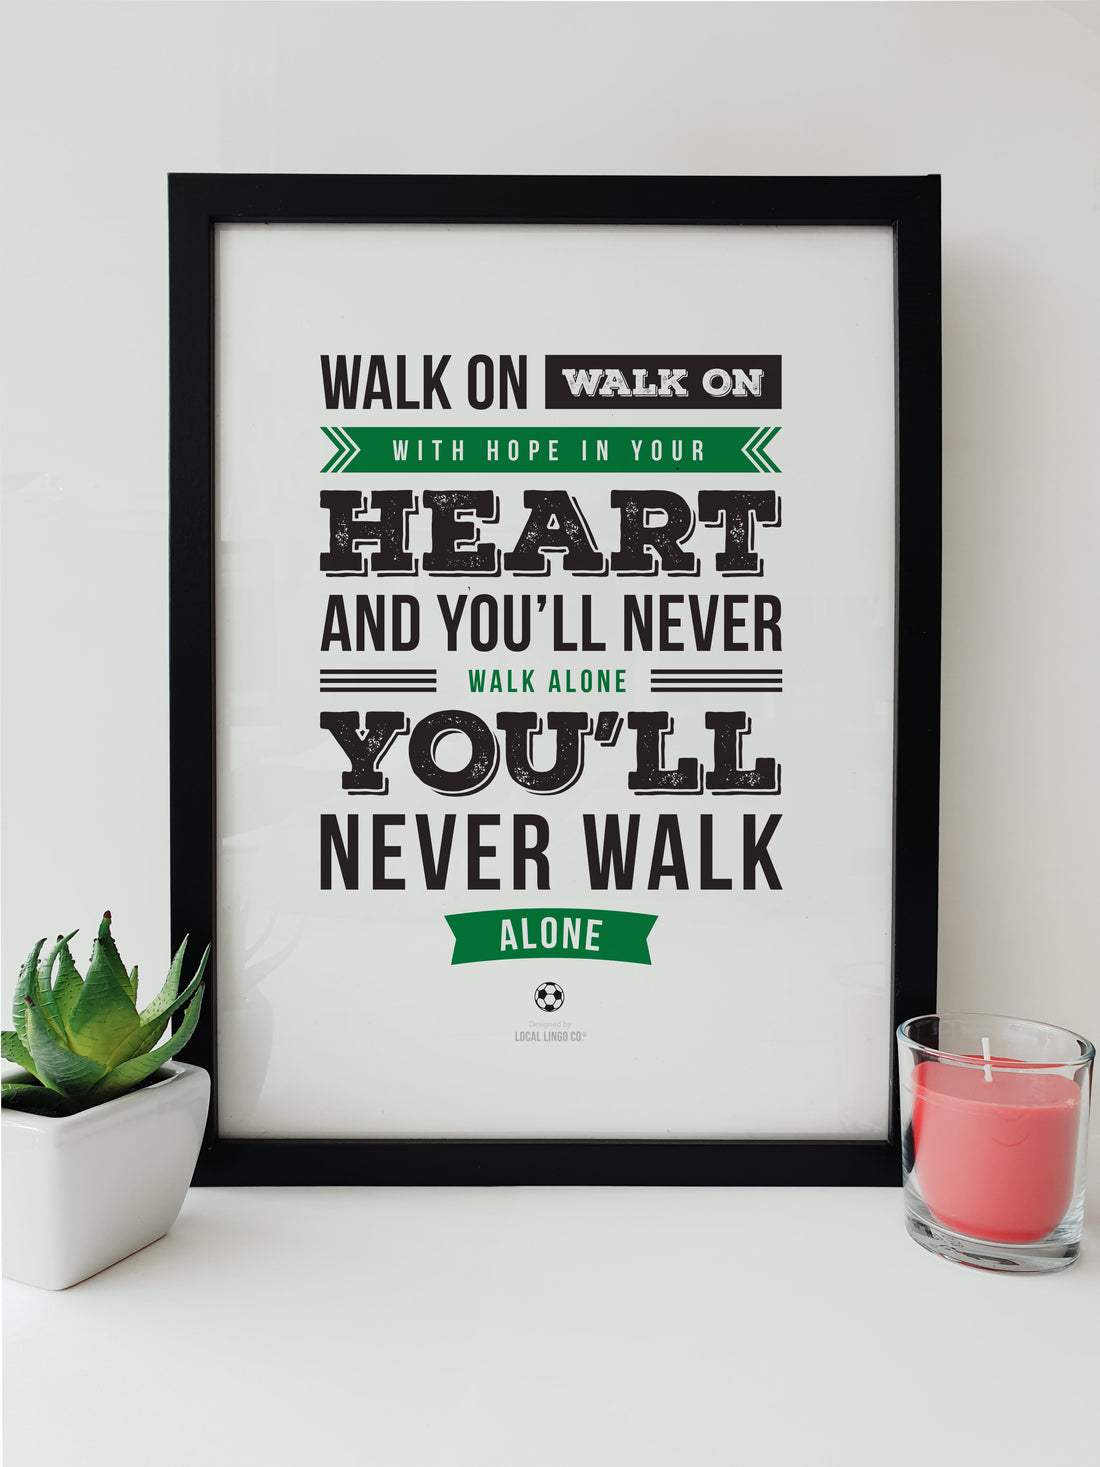 Walk On - You'll Never Walk Alone Celtic Football Fan Chant Lyrics Artwork by Local Lingo, featuring bold text in black and green on a white background in a black frame.